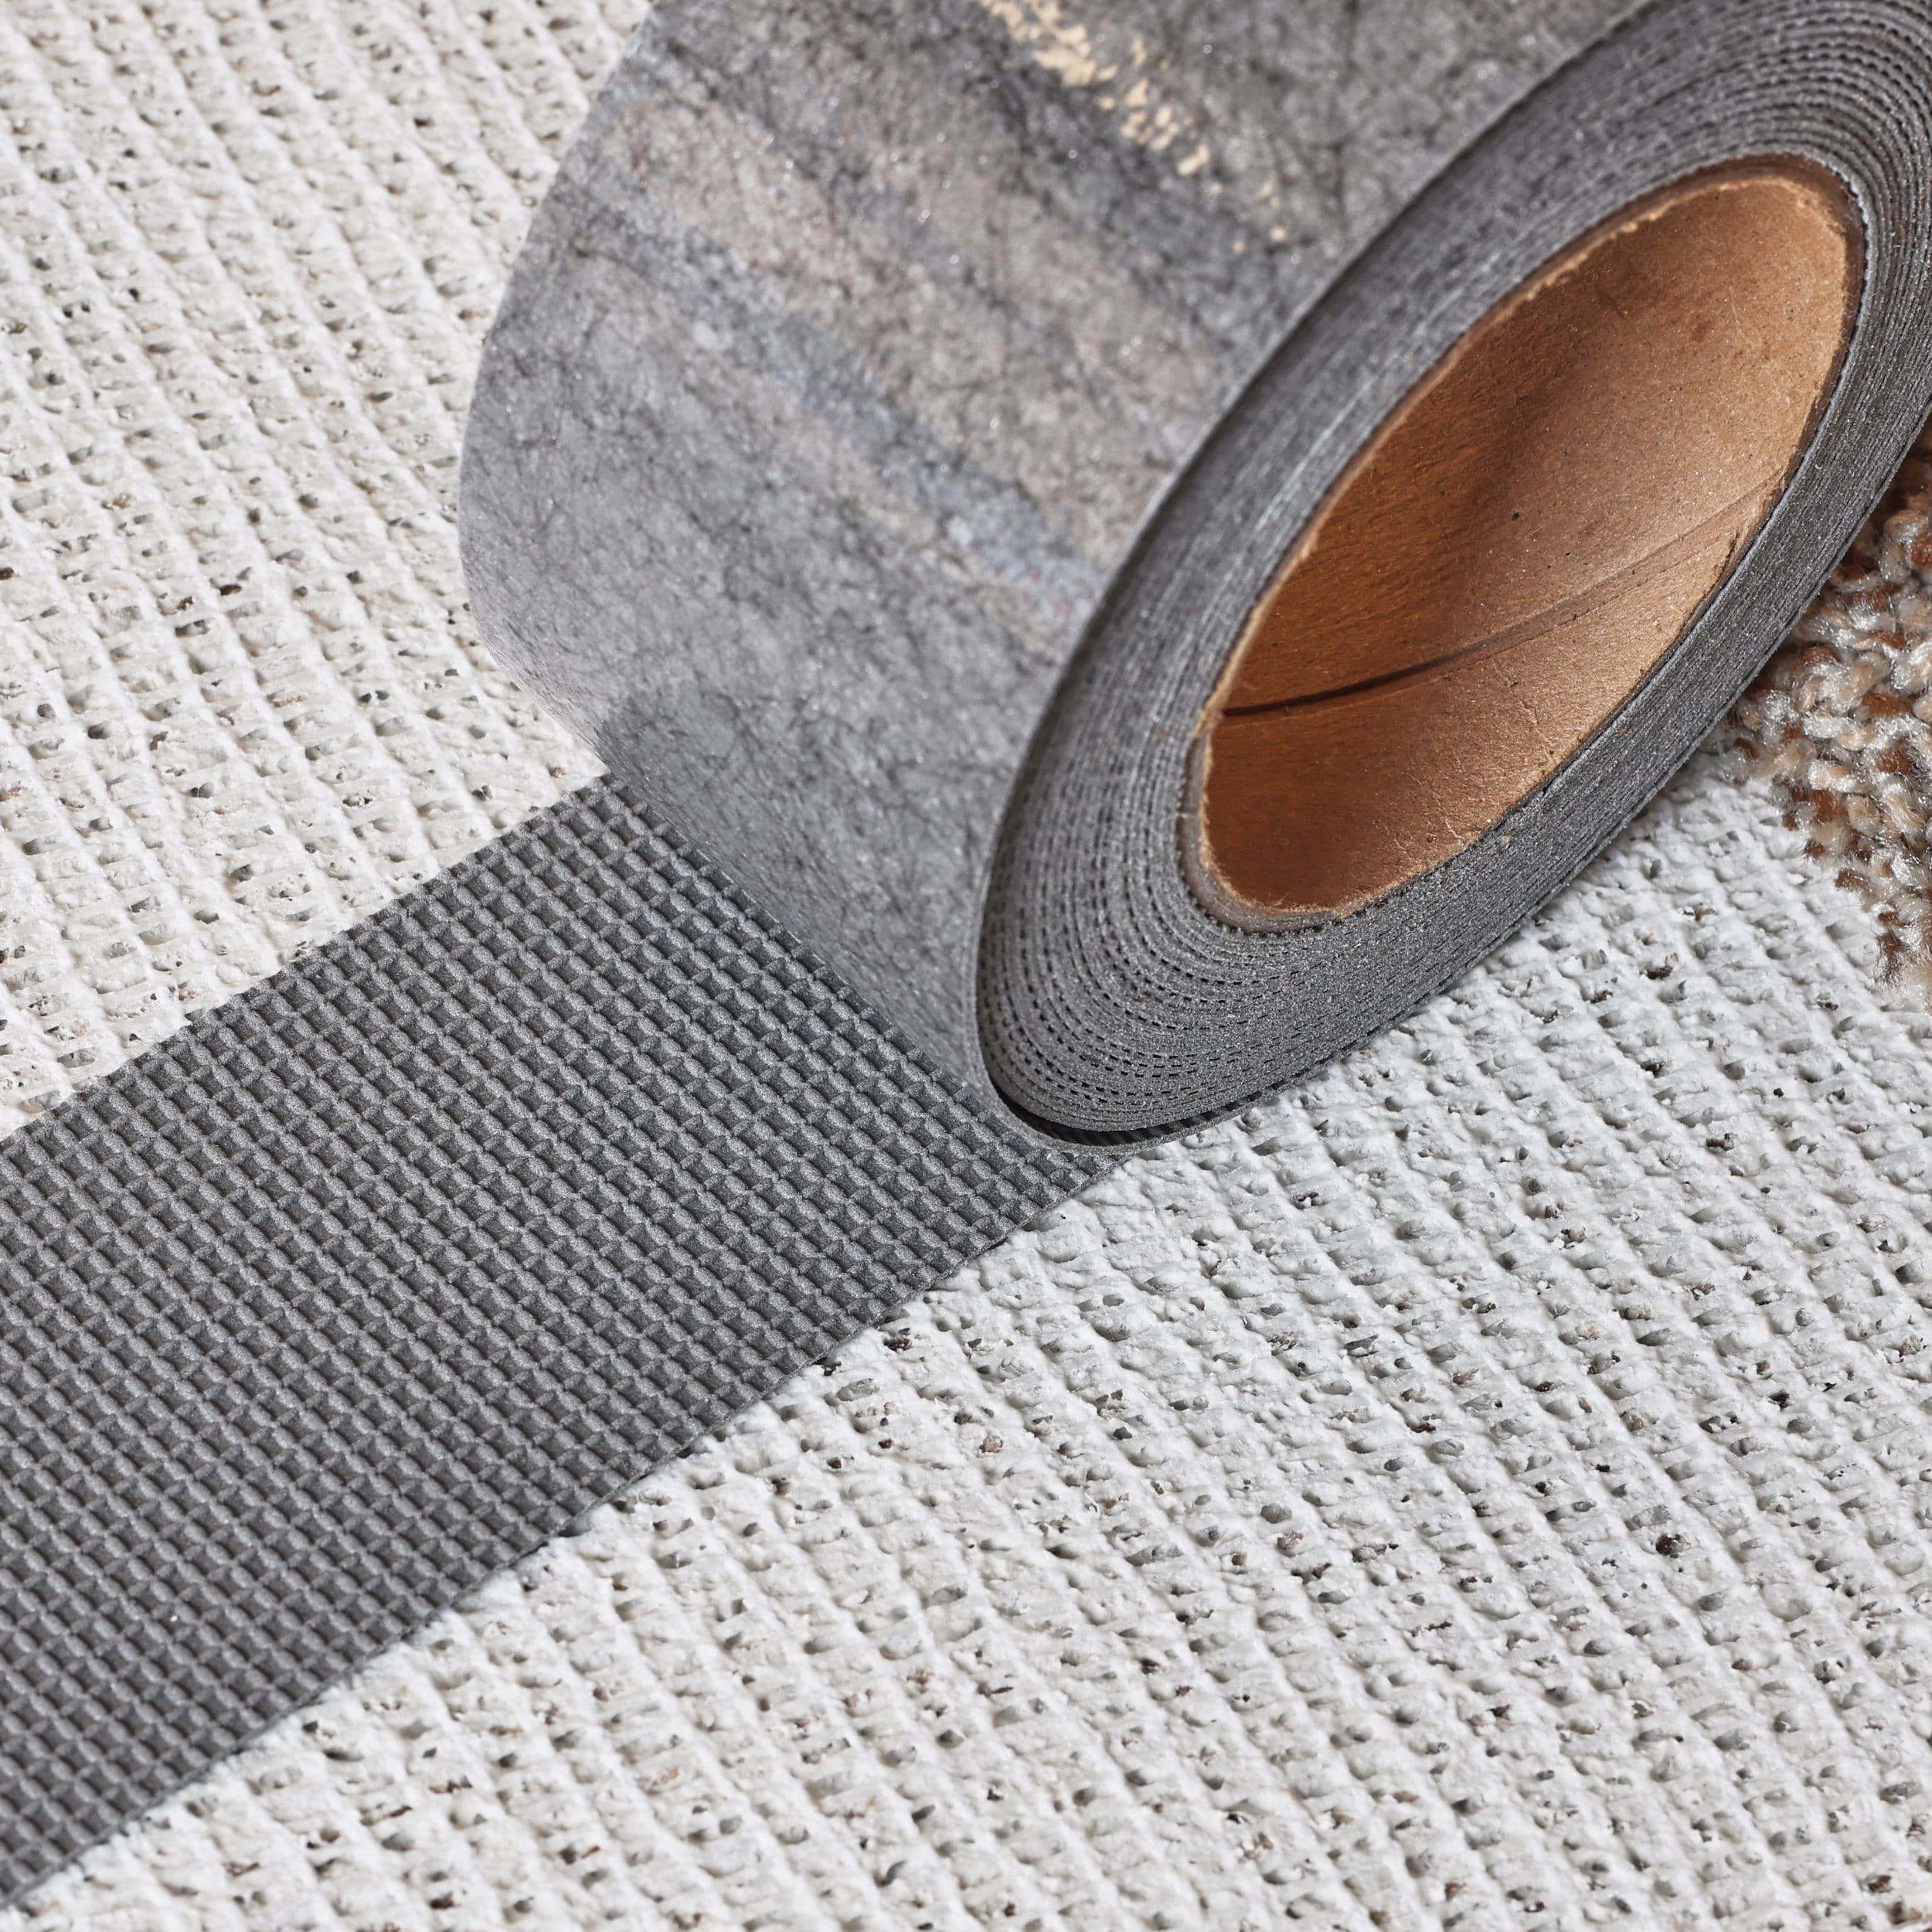 Nance Great Grip Rug Tape 2.5-in x 25-ft Gray Anti-Slip Rug Tape in the  Flooring Tape department at